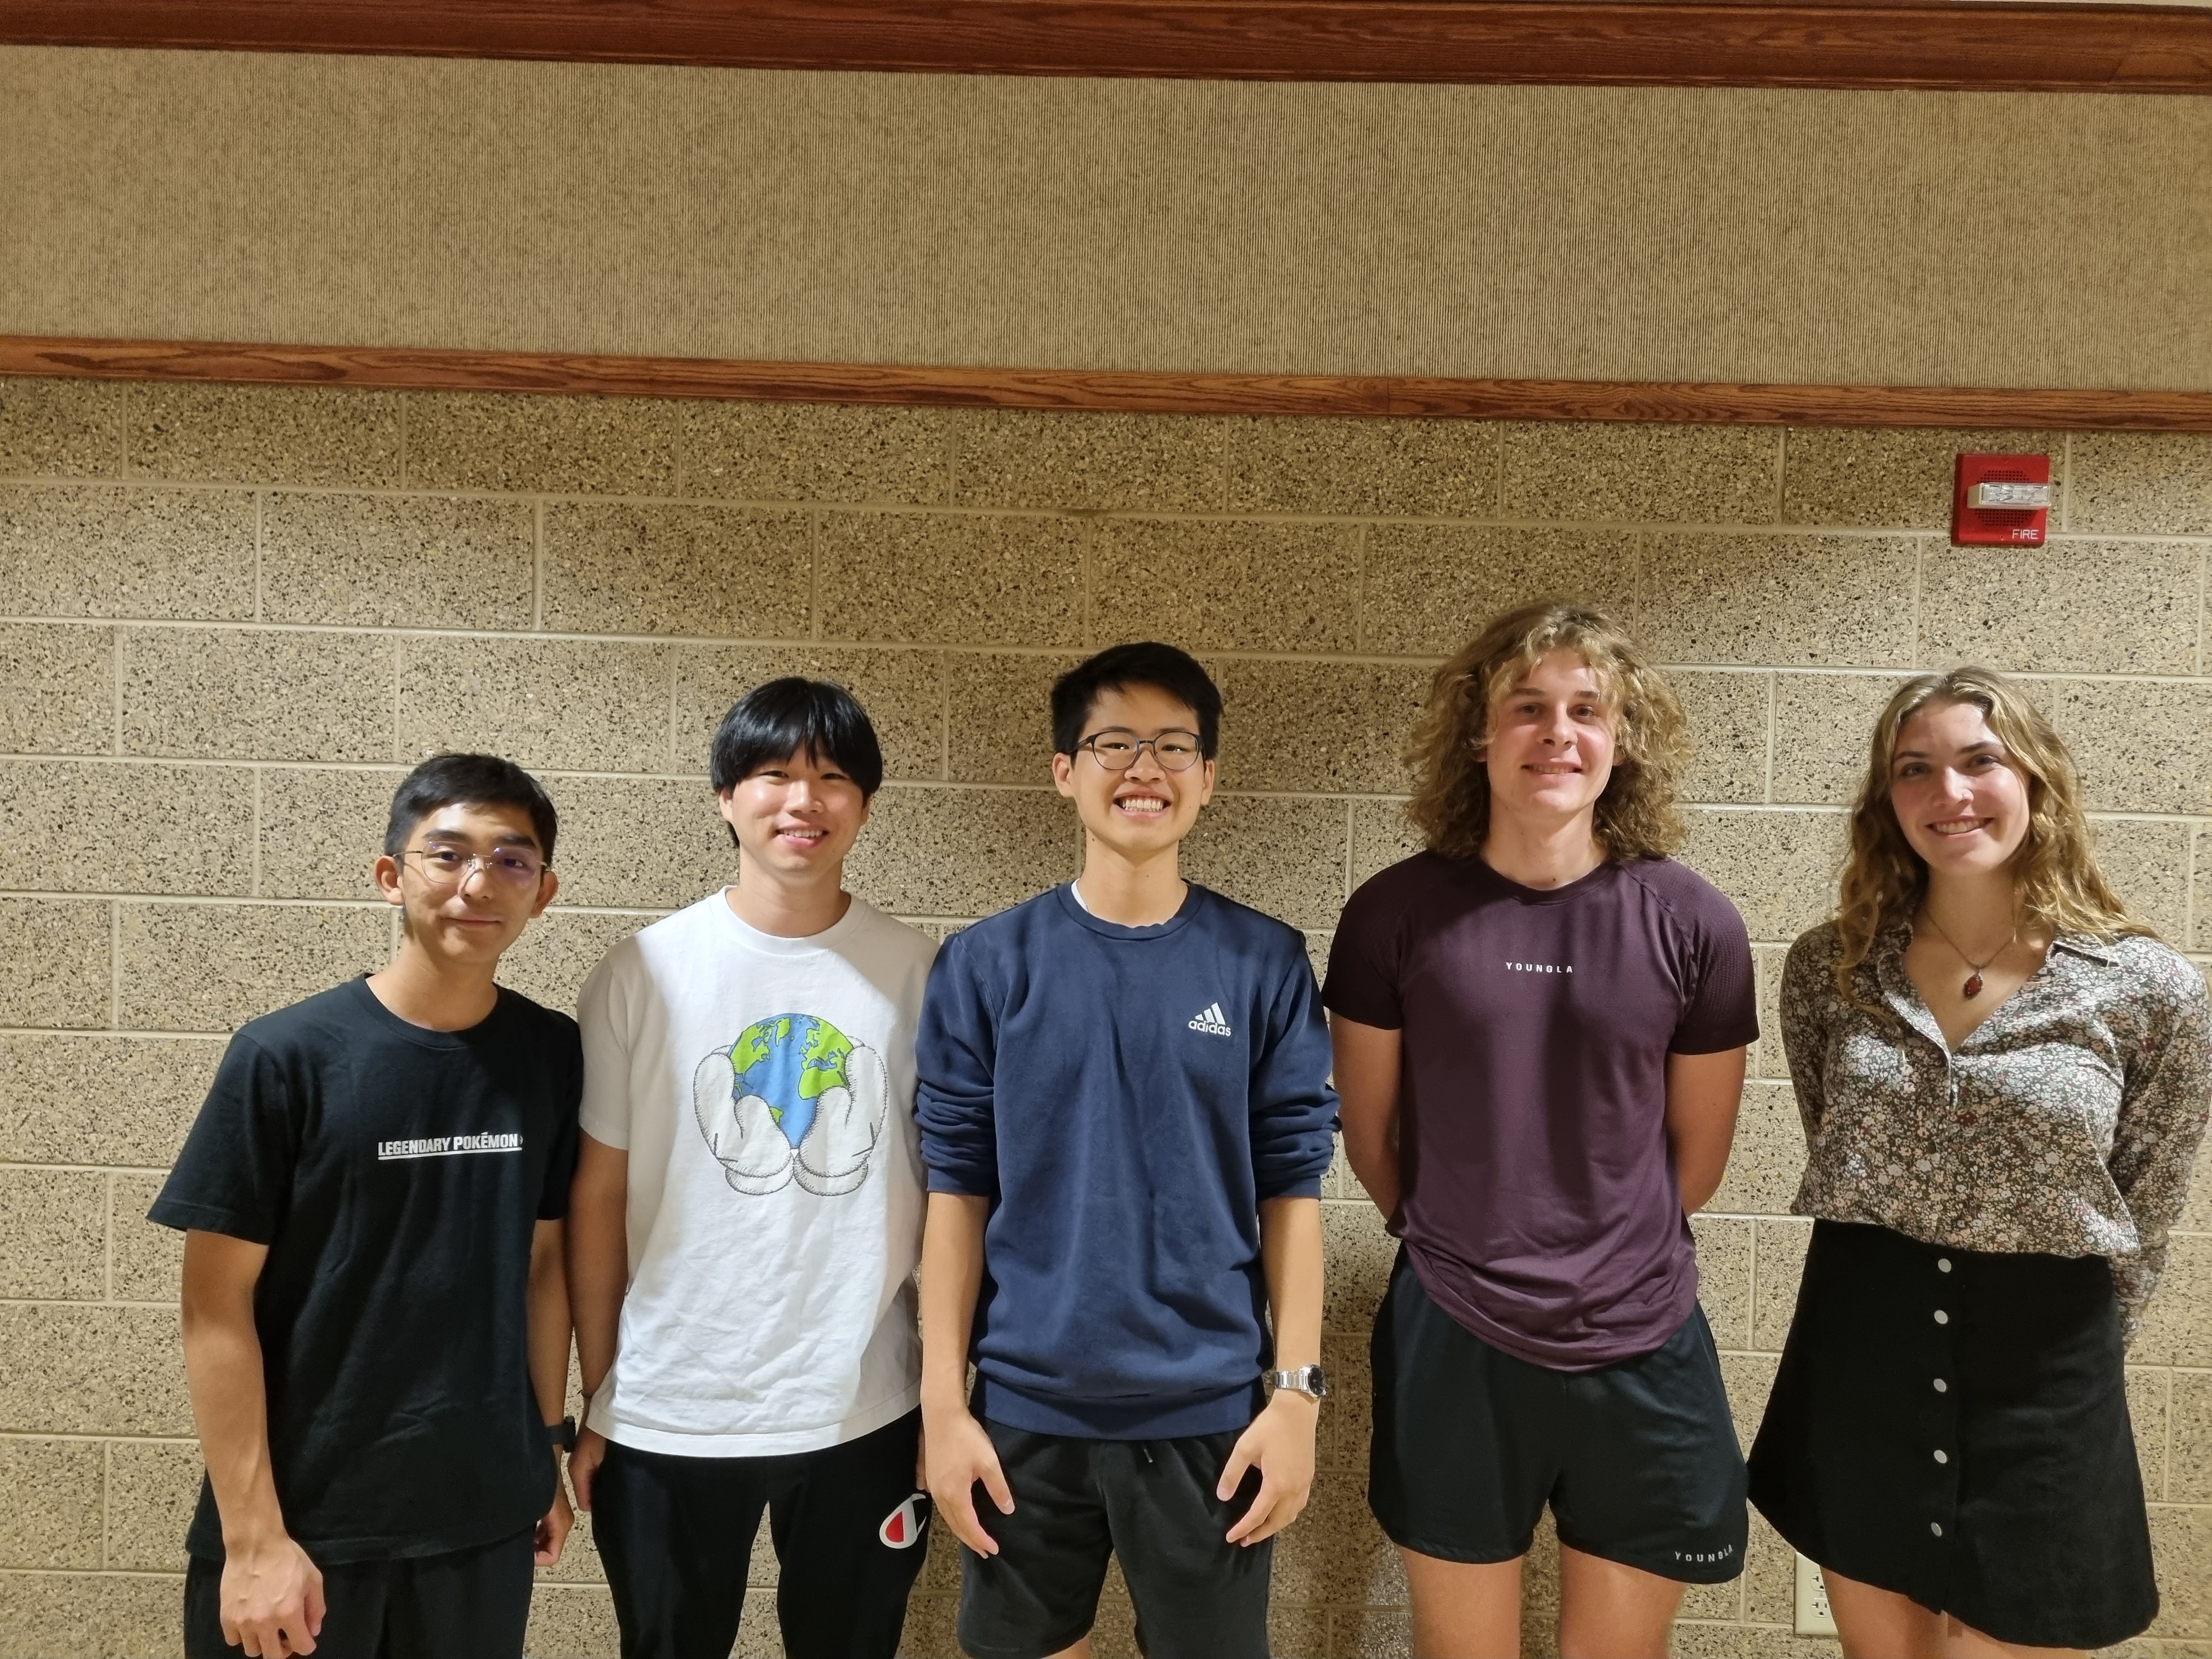 Group Picture: From Left to Right: Emilio Lim (Communicator & BWIG), Chanul Kim (BSAC), Jeffery Guo (BPAG), Griffin Radtke (ME Team Leader), Sydney Therien (BME Team Leader)